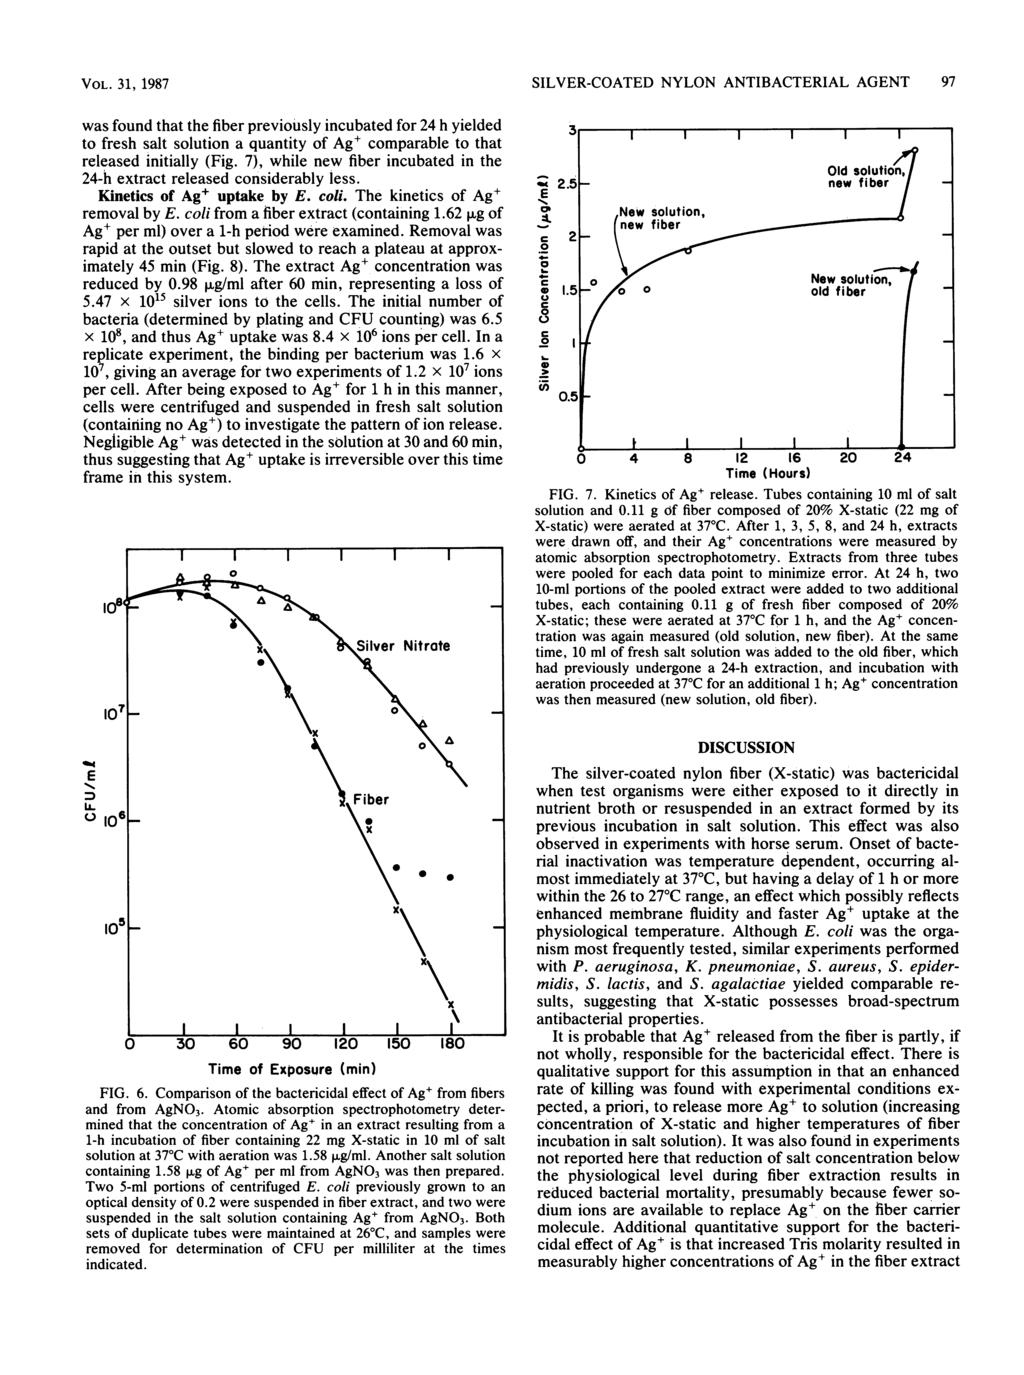 VOL. 31, 1987 was found that the fiber previously incubated for 24 h yielded to fresh salt solution a quantity of Ag+ comparable to that released initially (Fig.